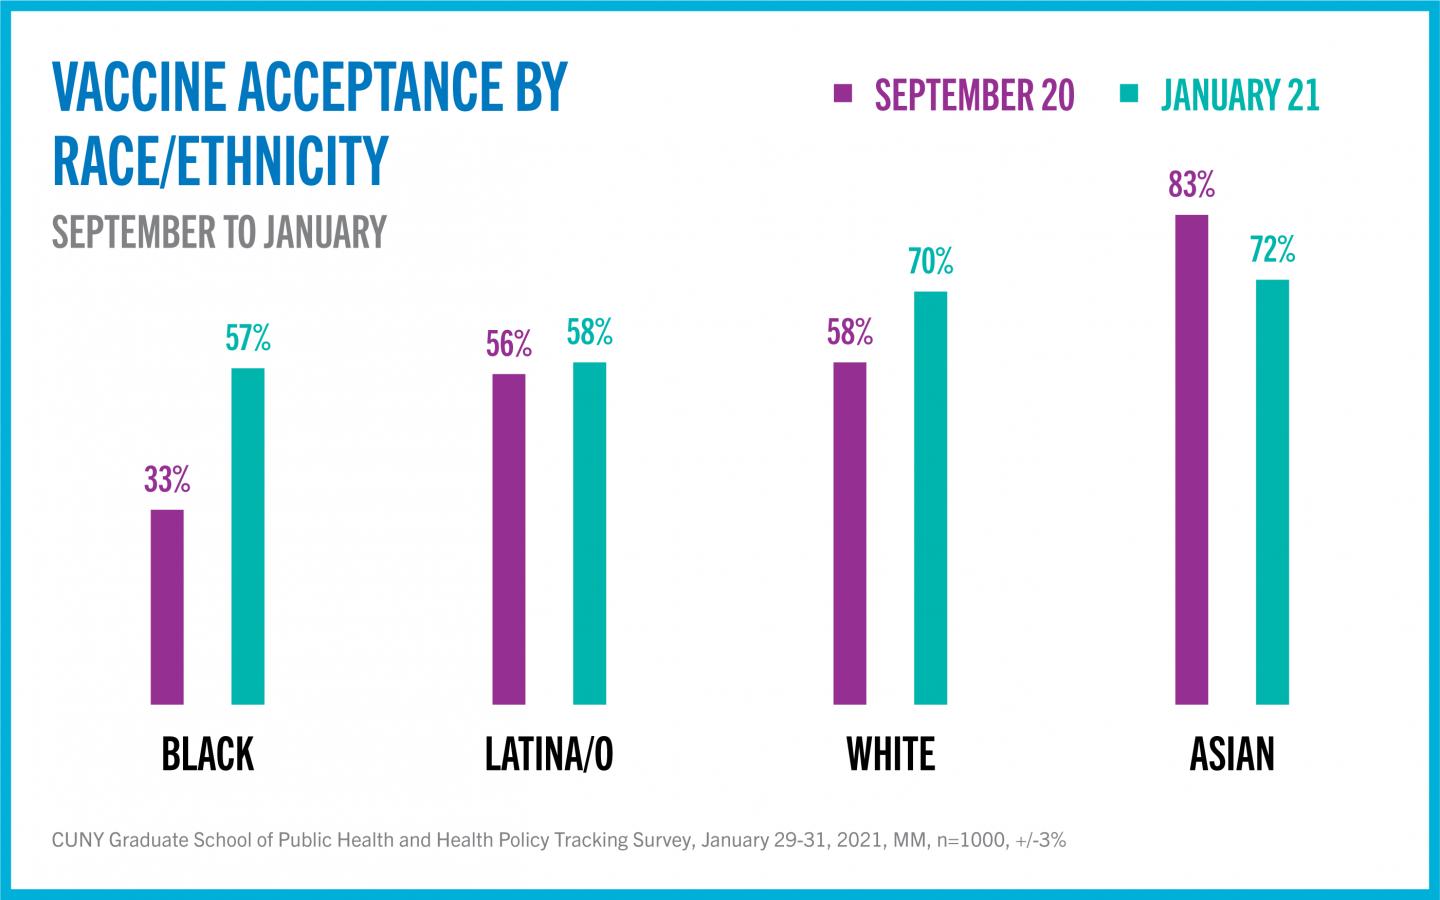 Vaccine acceptance by race/ethnicity